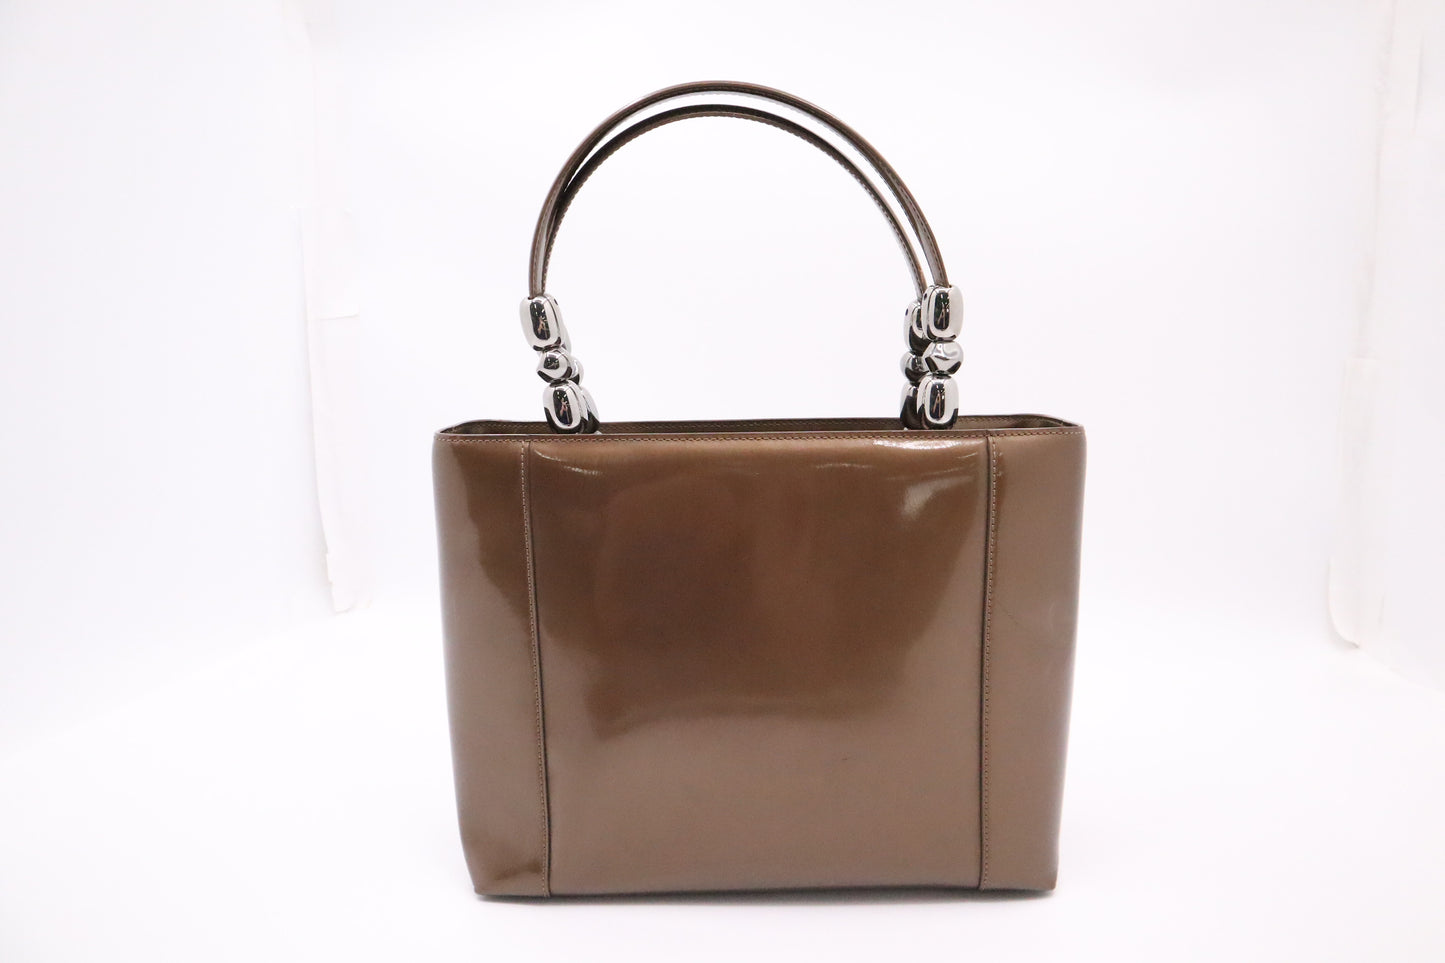 Dior Malice Shoulder Bag in Brown Patent Leather